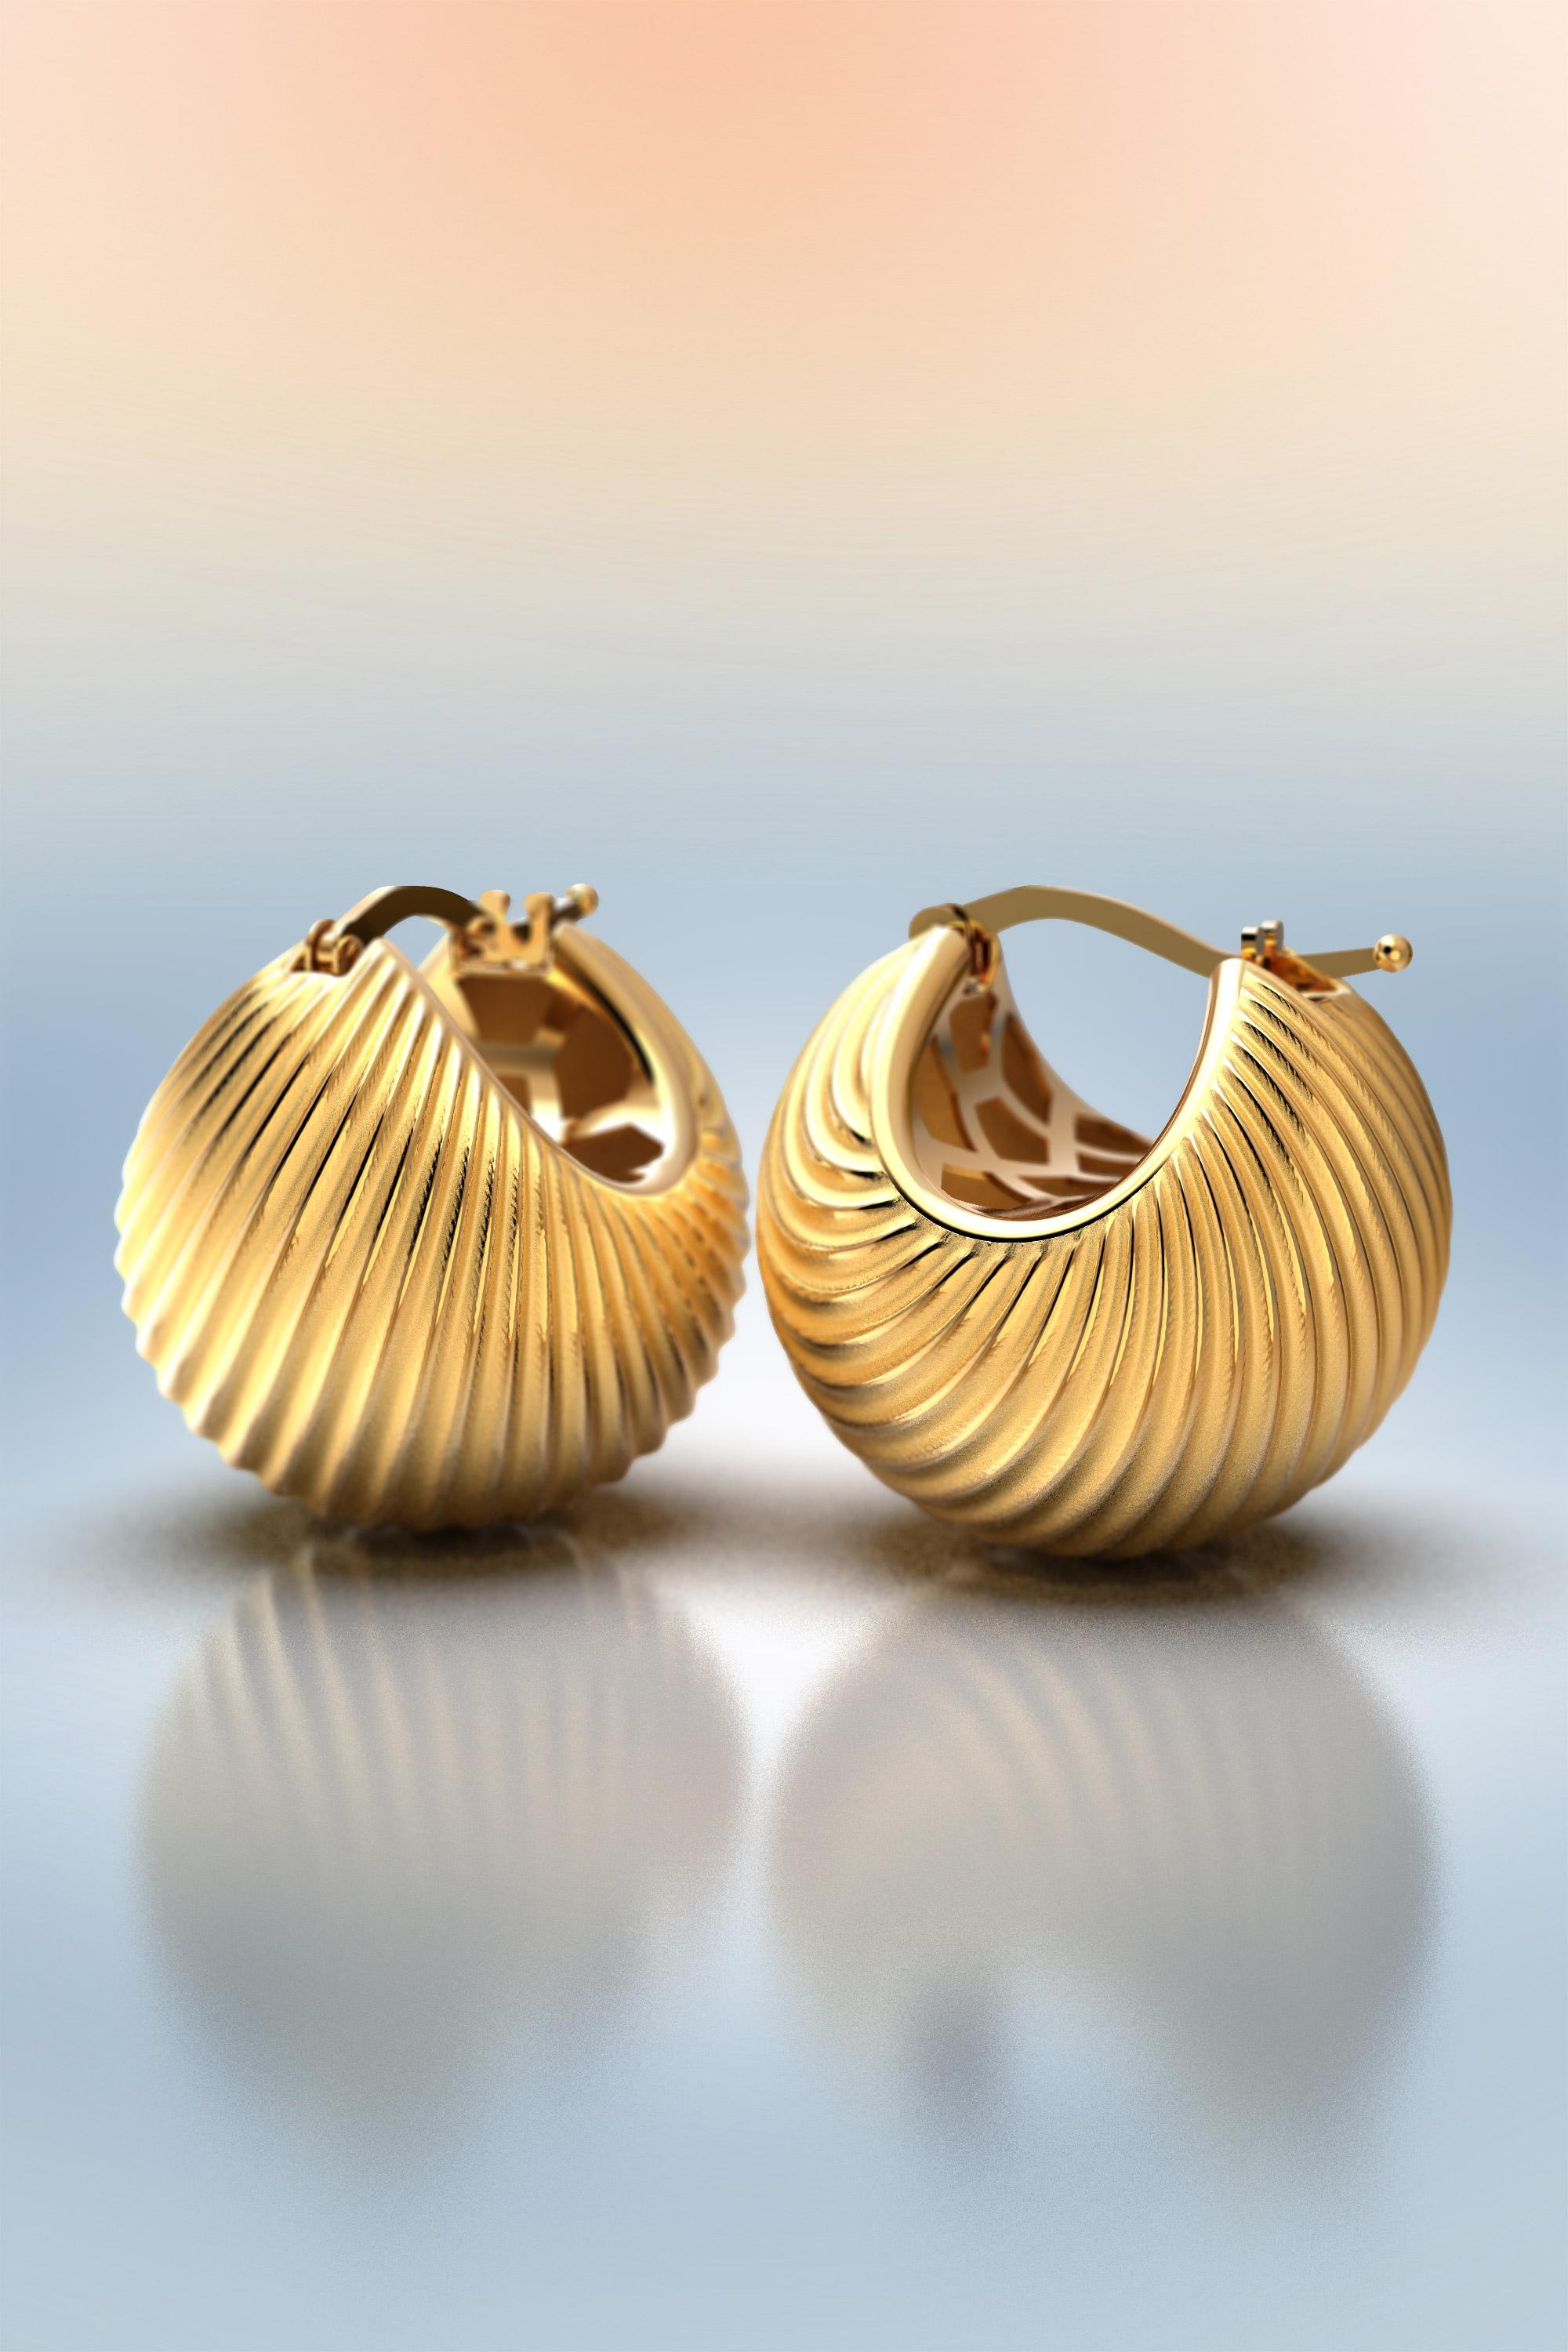 Oltremare Gioielli 18 Karat Yellow Gold Hoop Earrings Made in Italy For Sale 2